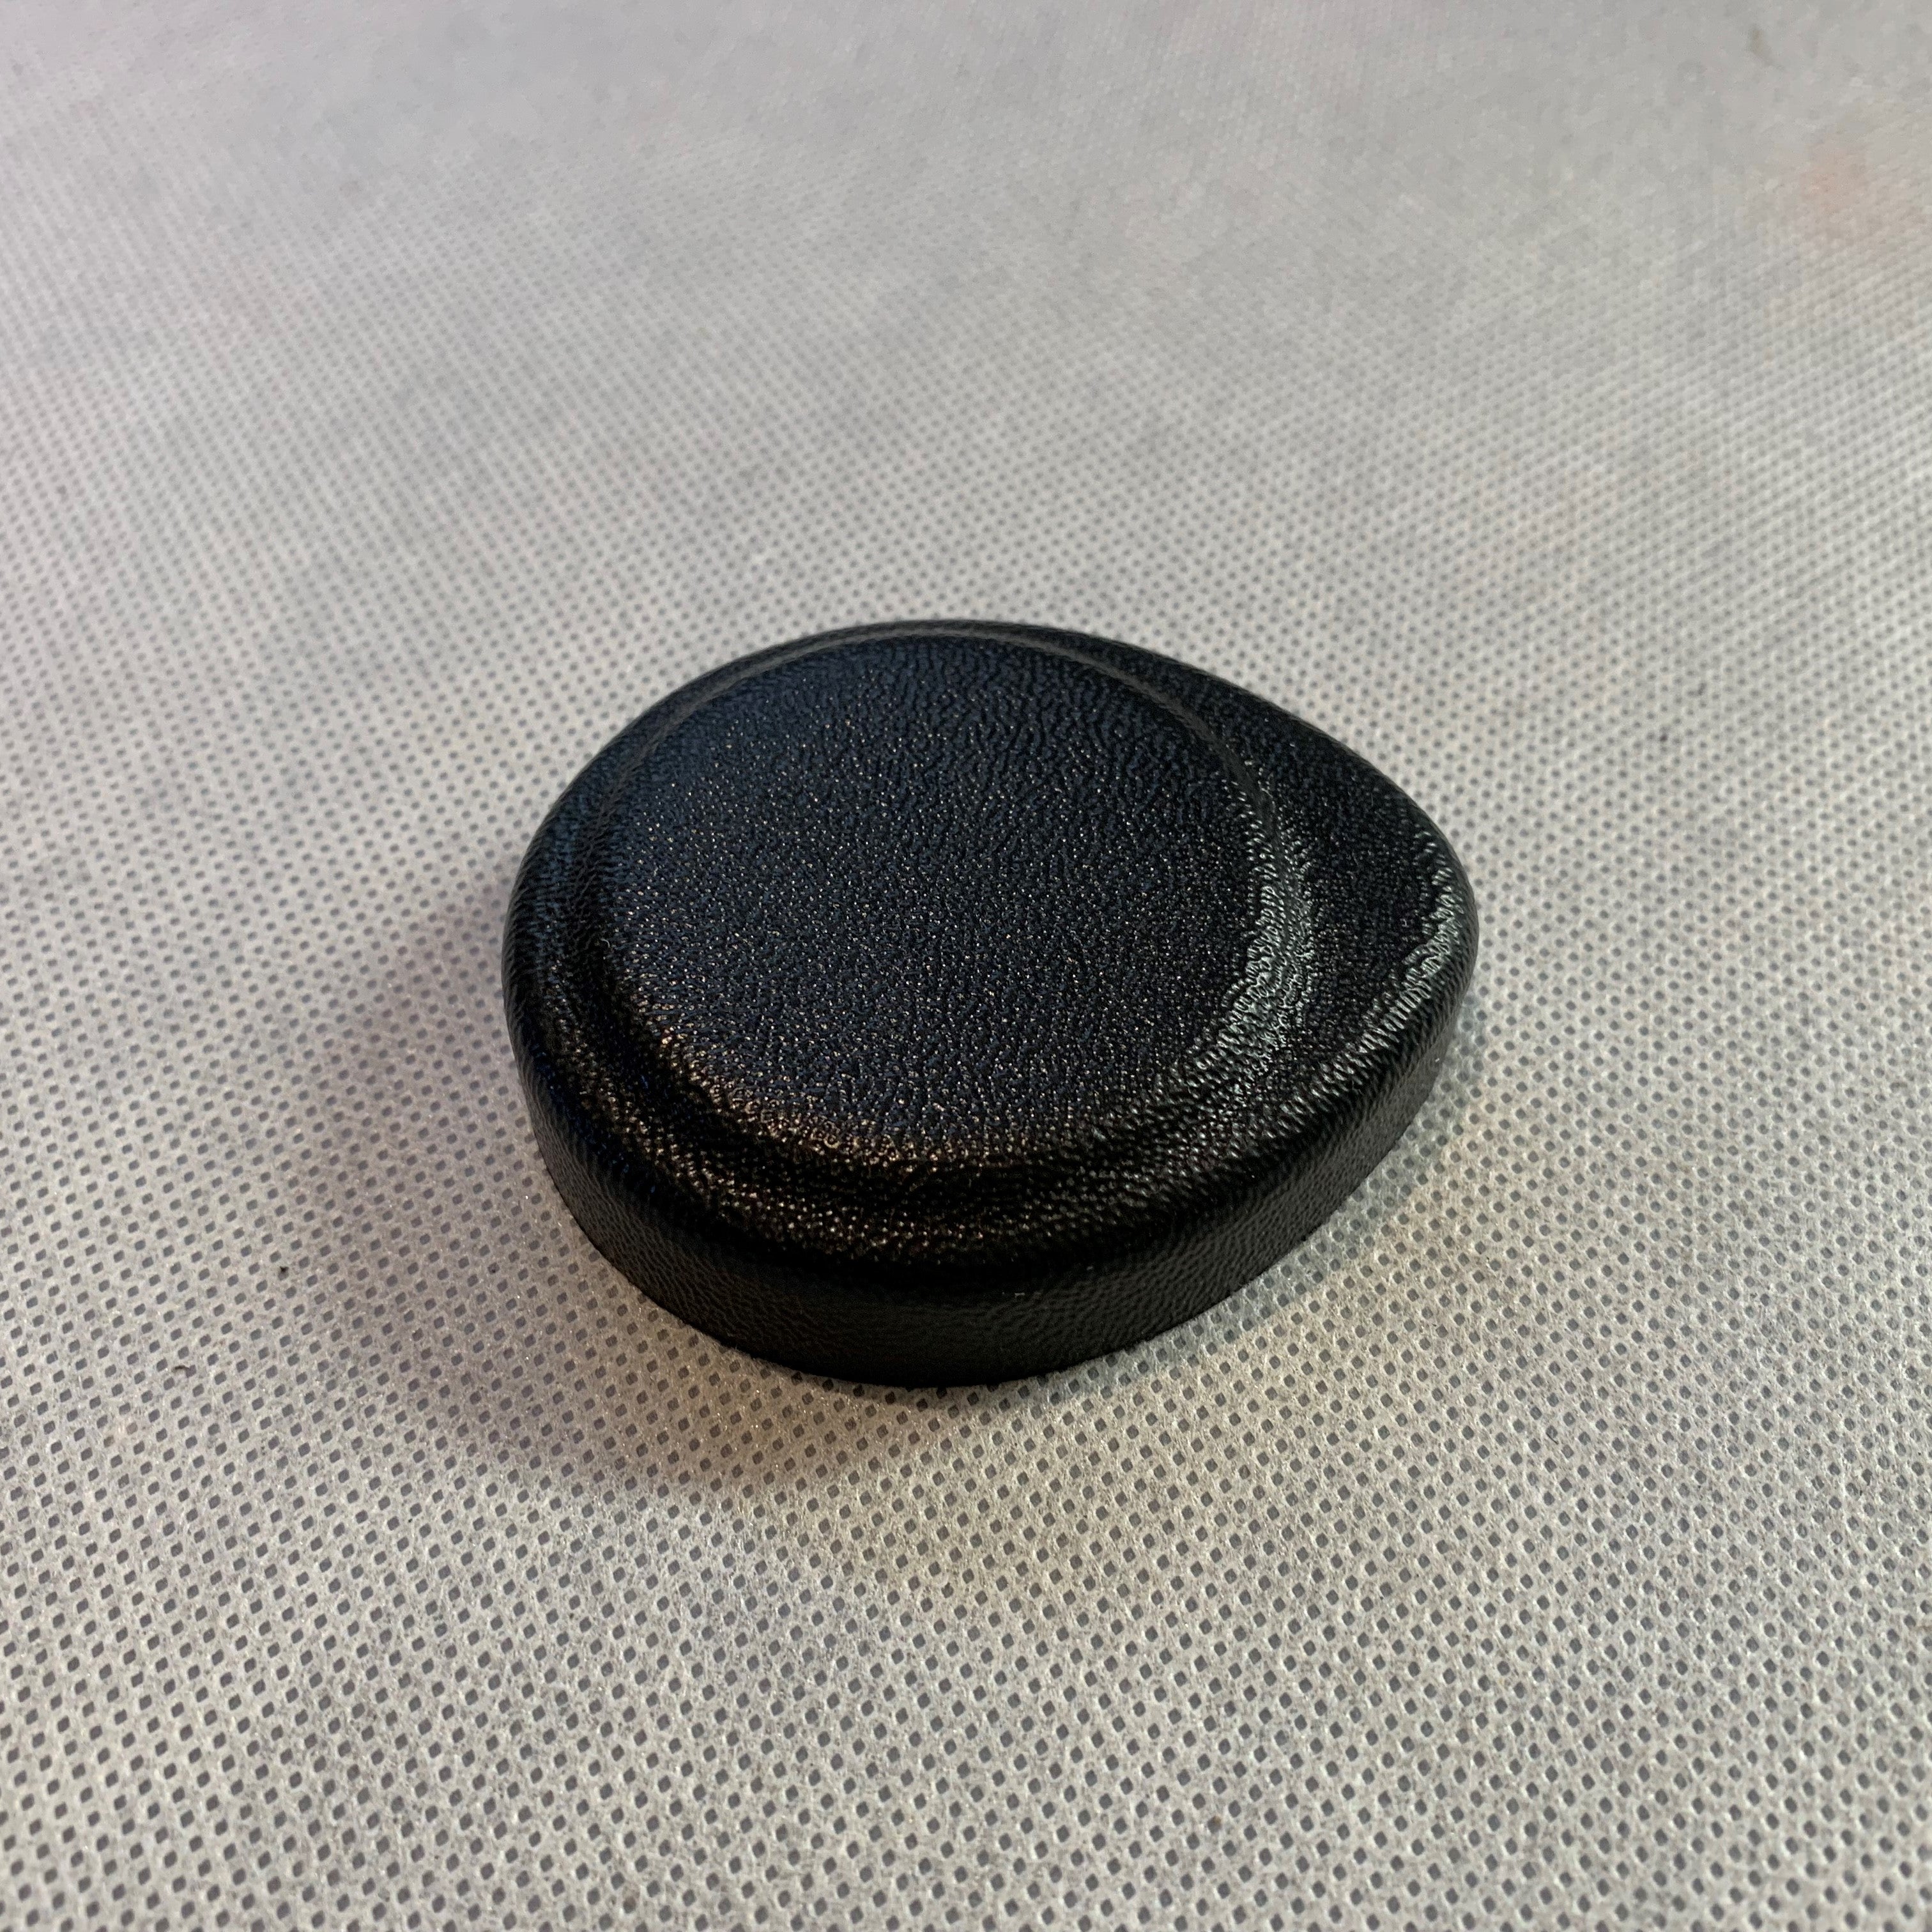 Proform Screen Washer Bottle Cap Cover - Mk4 Renault Clio RS (Plastic Finishes)